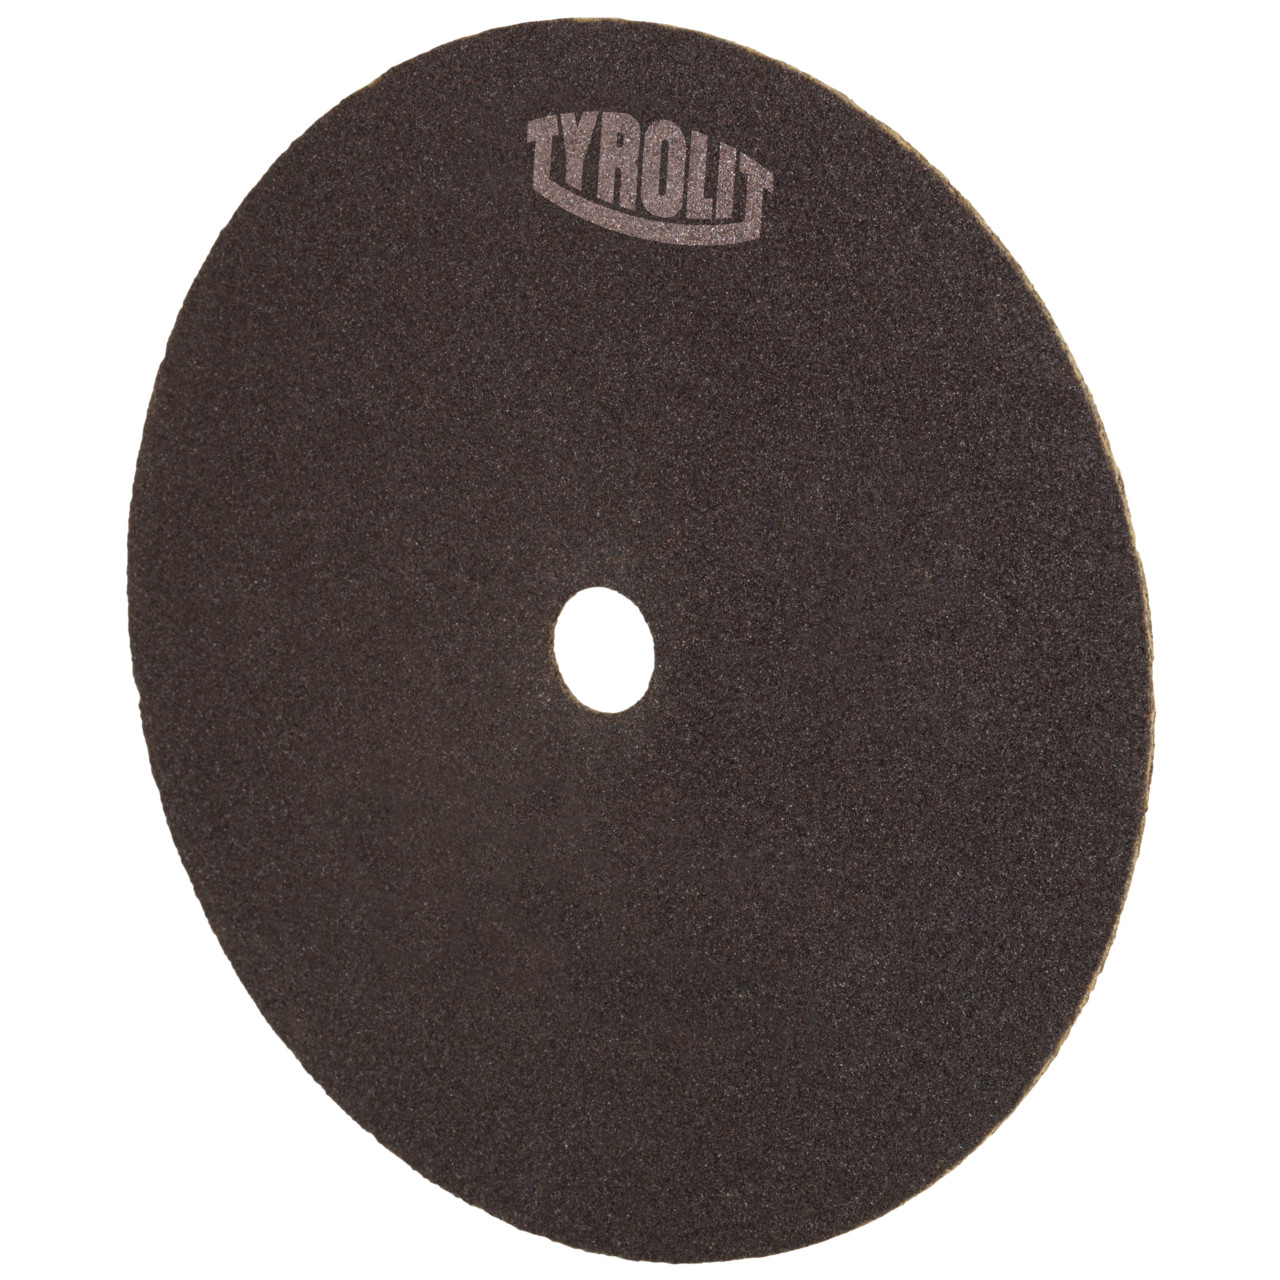 Tyrolit Cutting disc for cutting and saw sharpening DxDxH 100x1x20 For steel and HSS, shape: 41N - straight version (non-woven cutting disc), Art. 46633